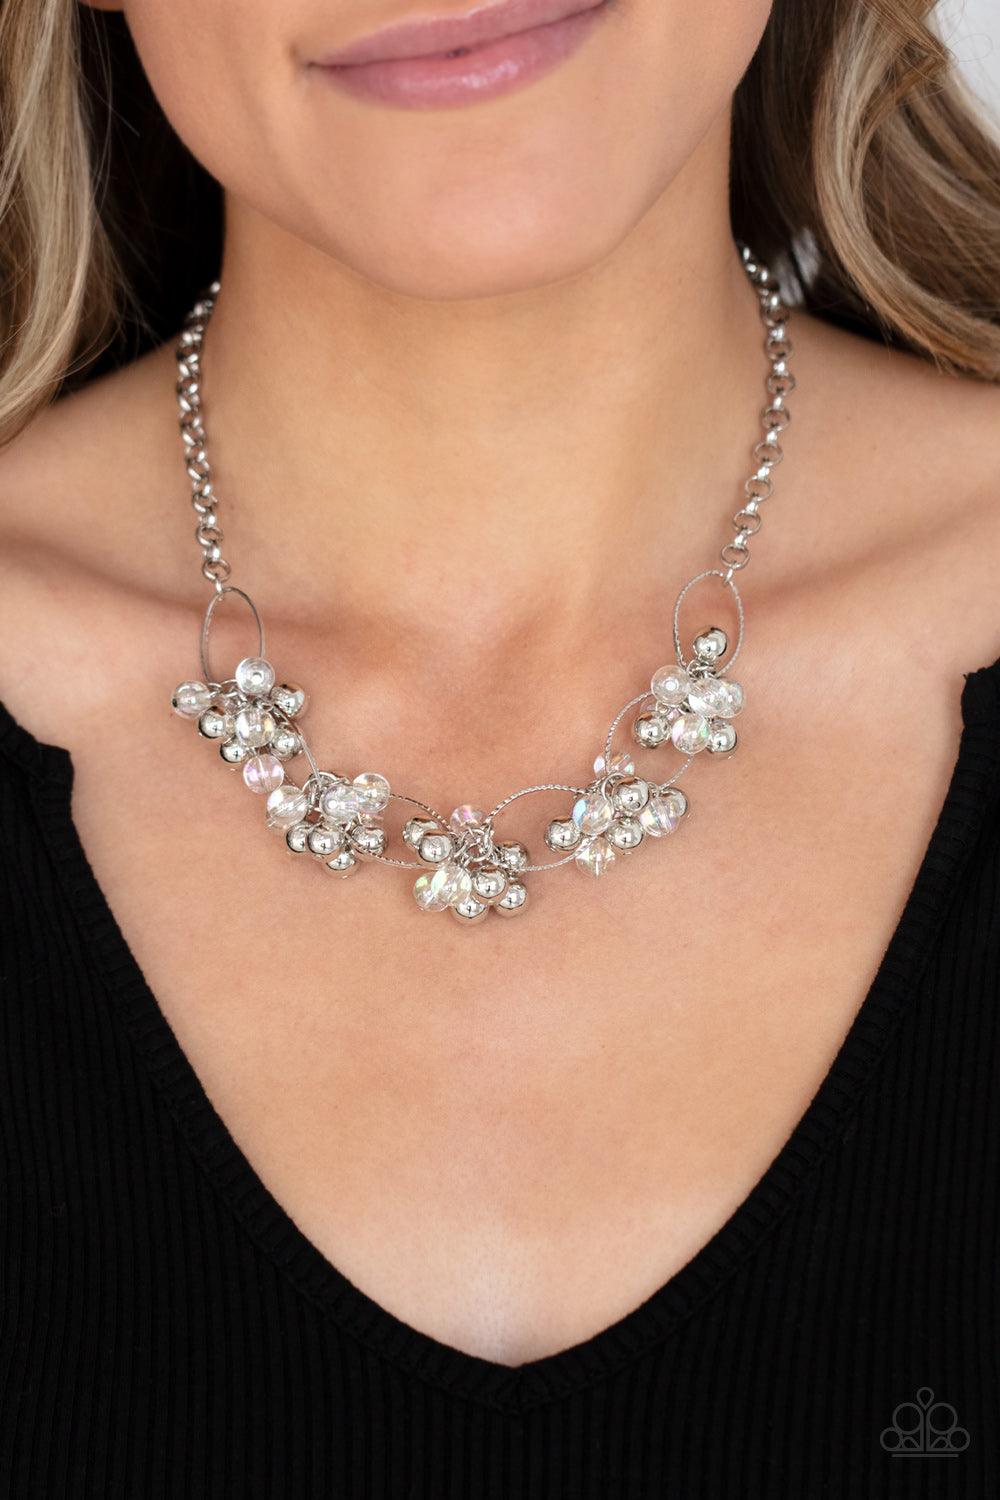 Paparazzi Accessories Effervescent Ensemble - Multi Clusters of glassy iridescent and shiny silver beads link with textured silver ovals, creating a bubbly effervescence below the collar. Features an adjustable clasp closure. Sold as one individual neckla